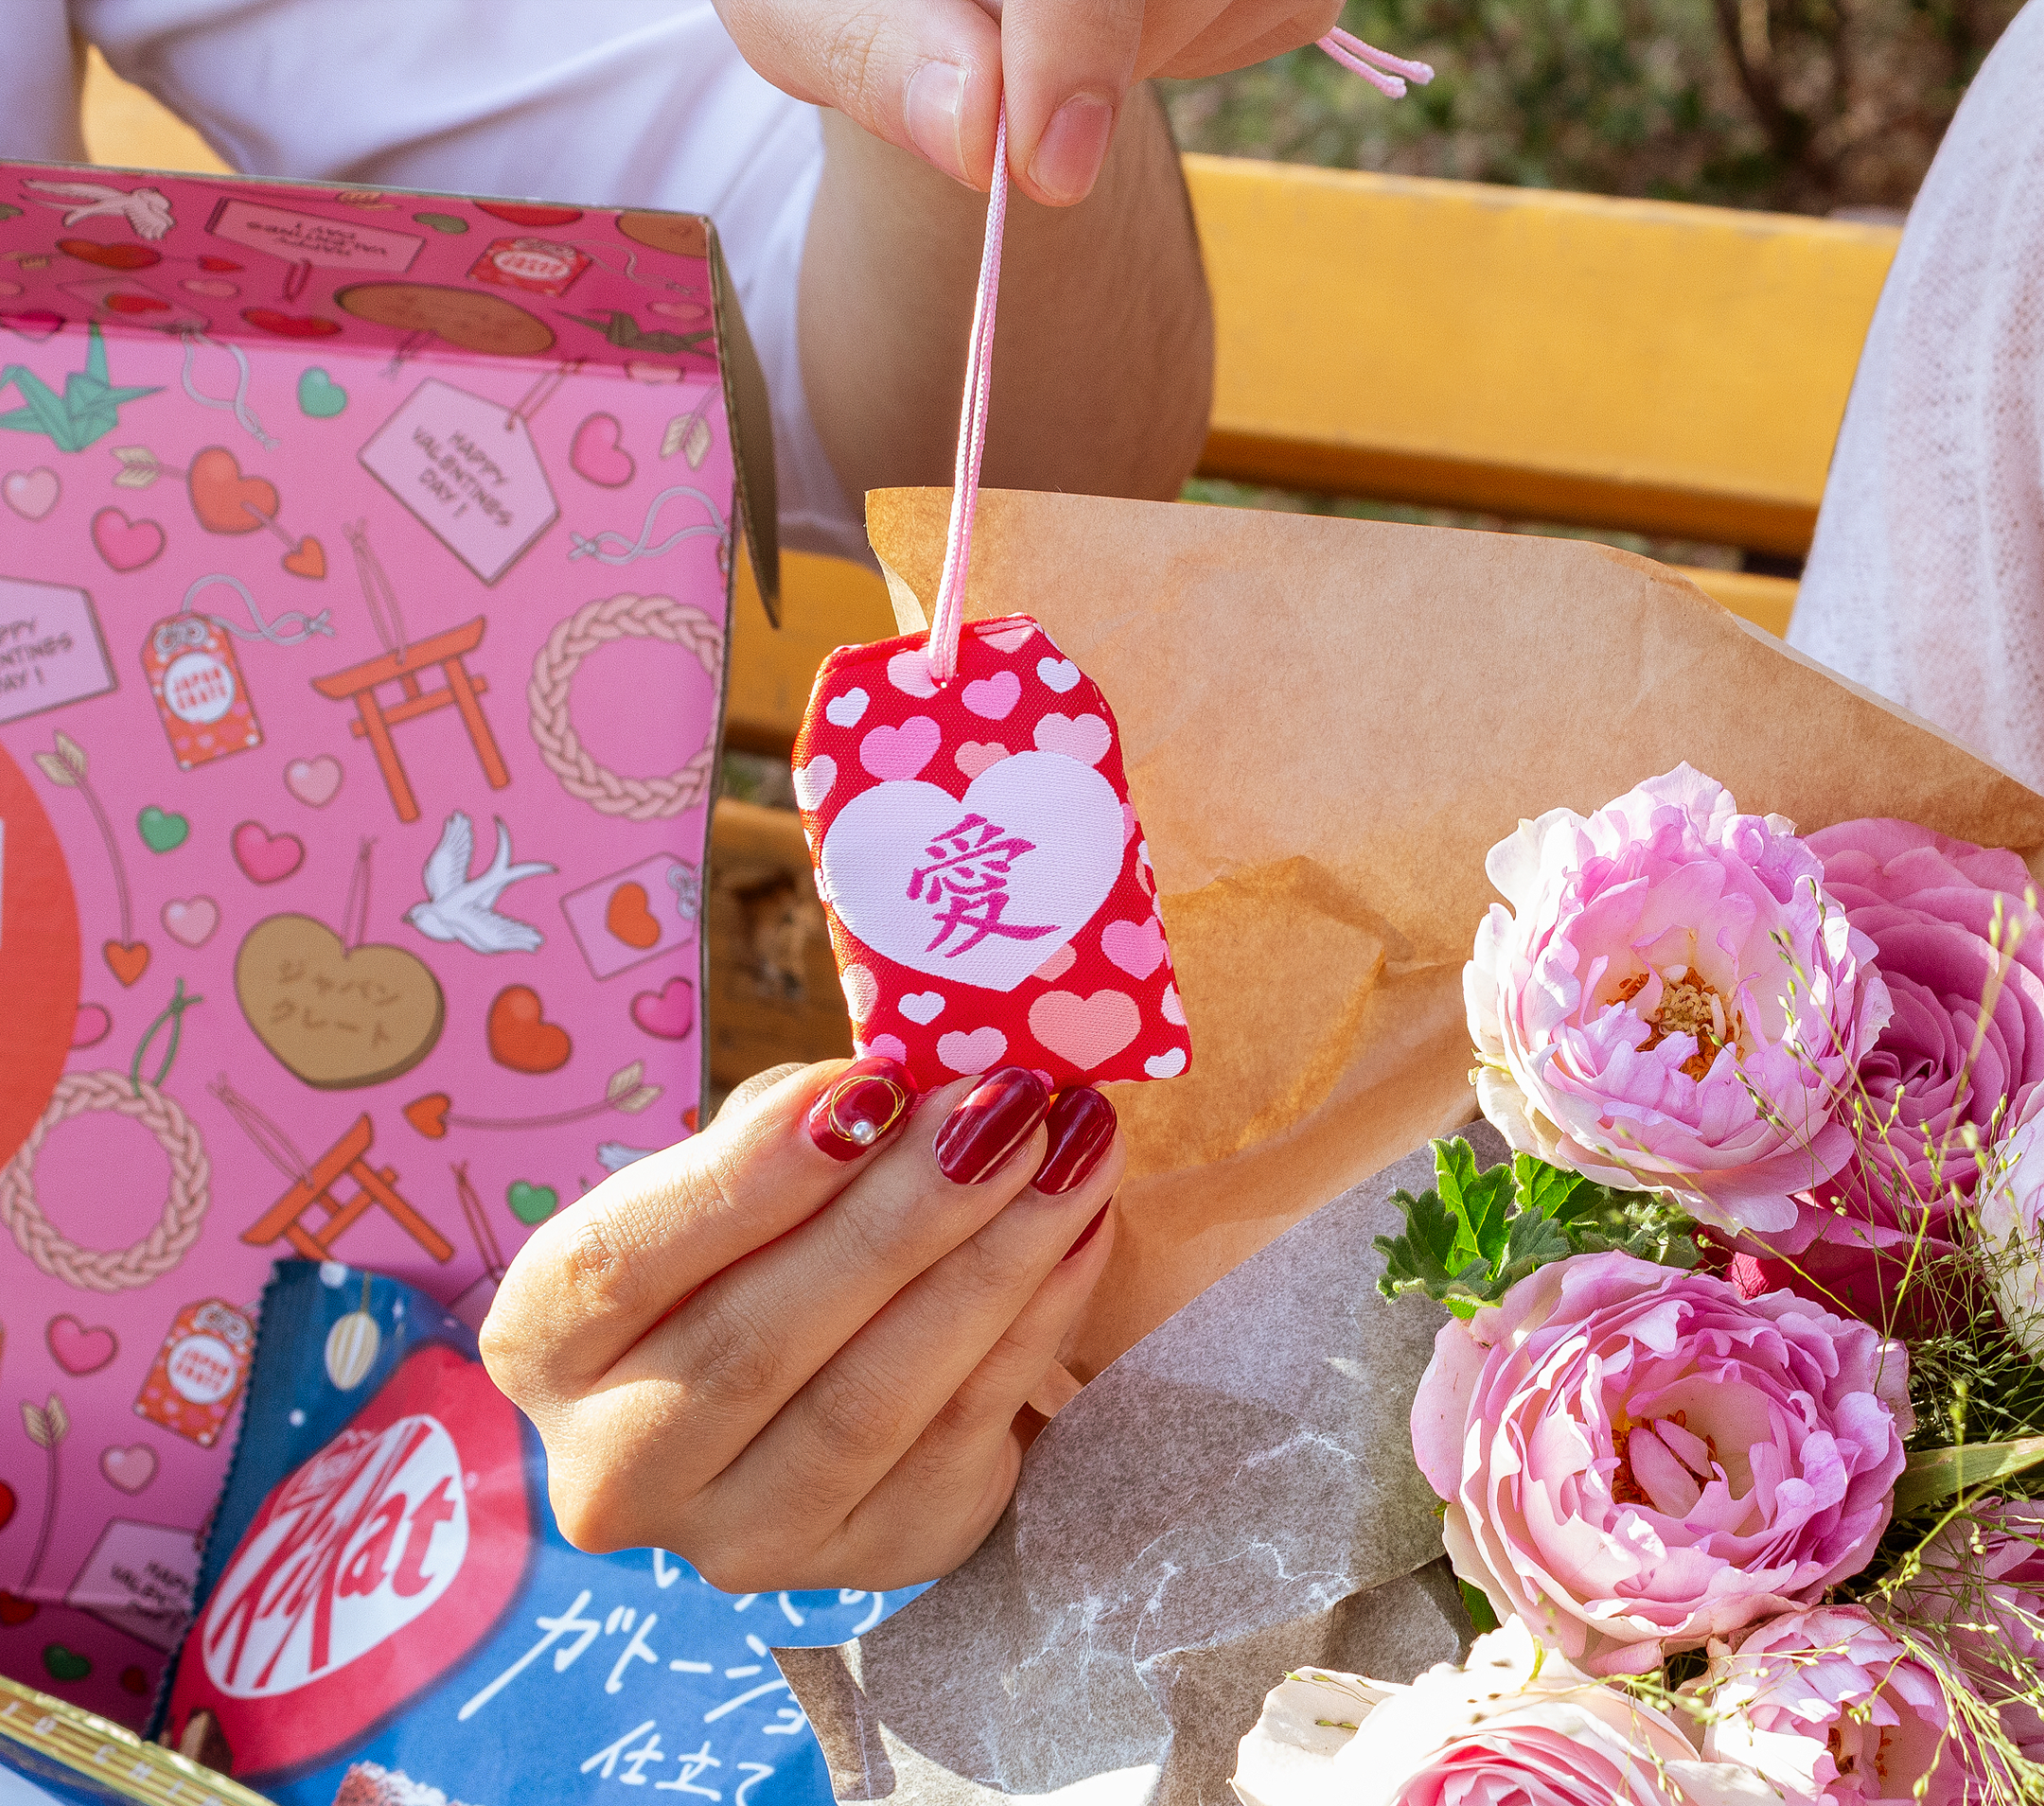 Each crate comes with a bonus omamori lucky charm to bring love to your life!